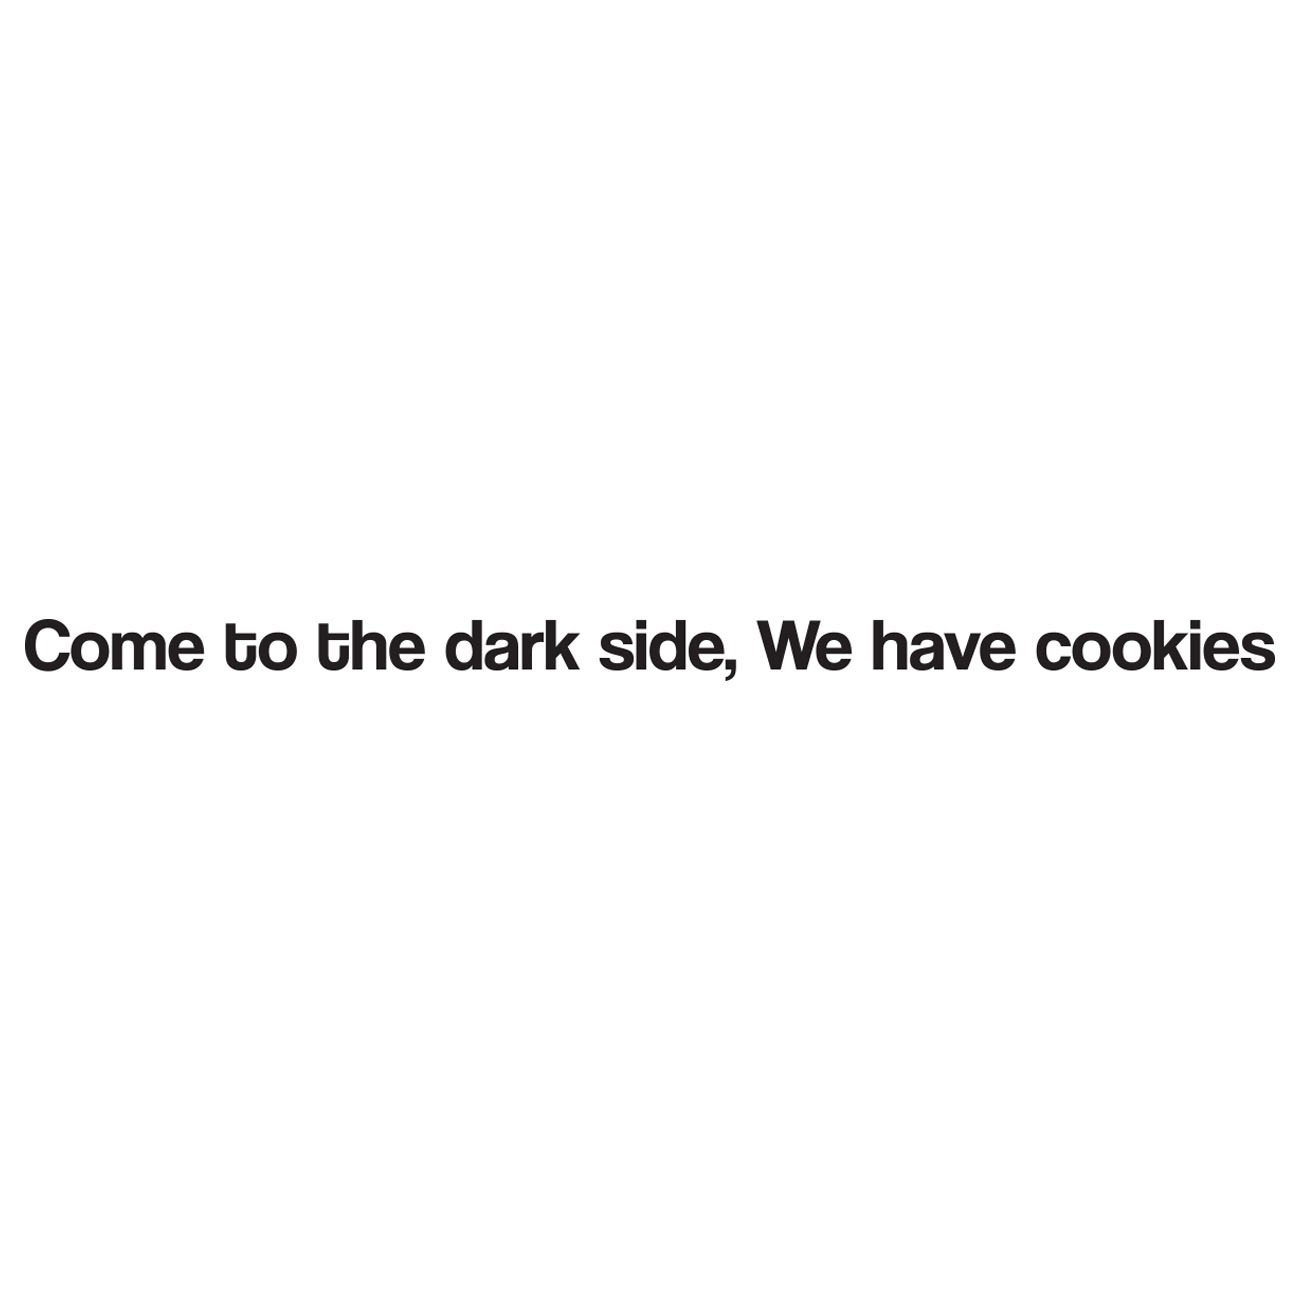 Come to the dark side - We have cookies